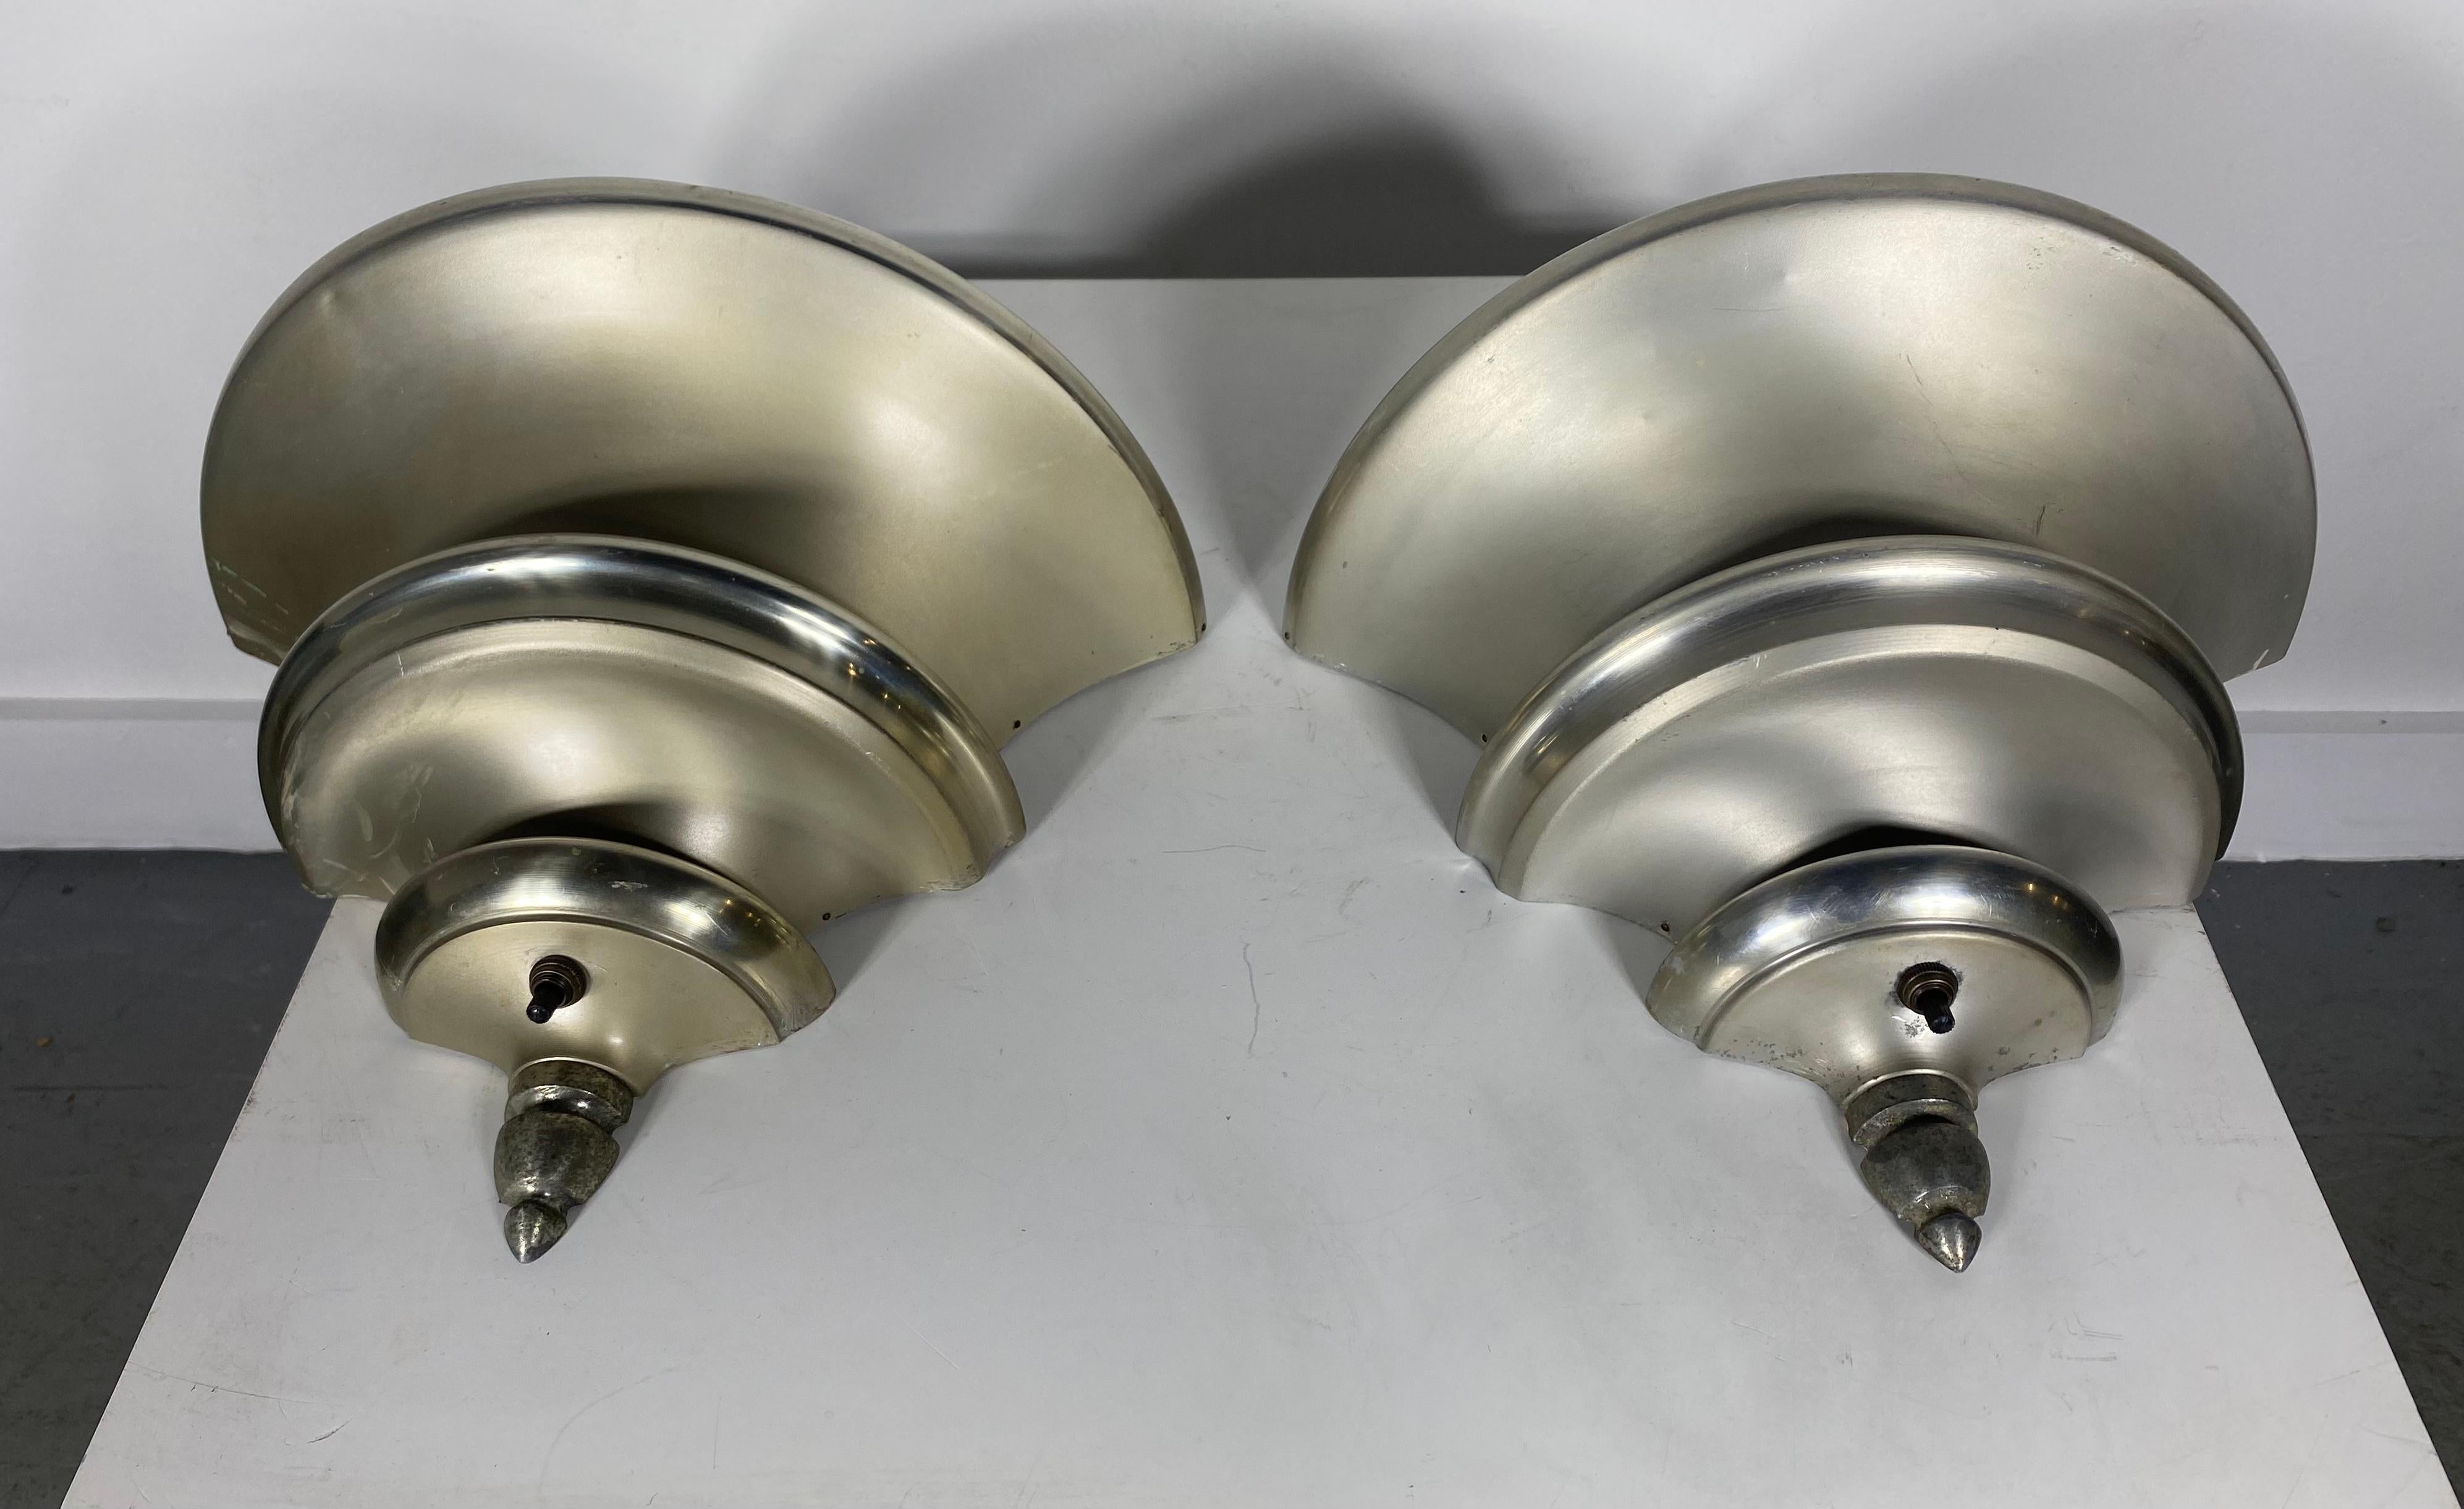 Pair of brushed aluminum Art Deco wall sconces with polished accents designed by Walter Von Nessen. circa 1930s. Classic design.